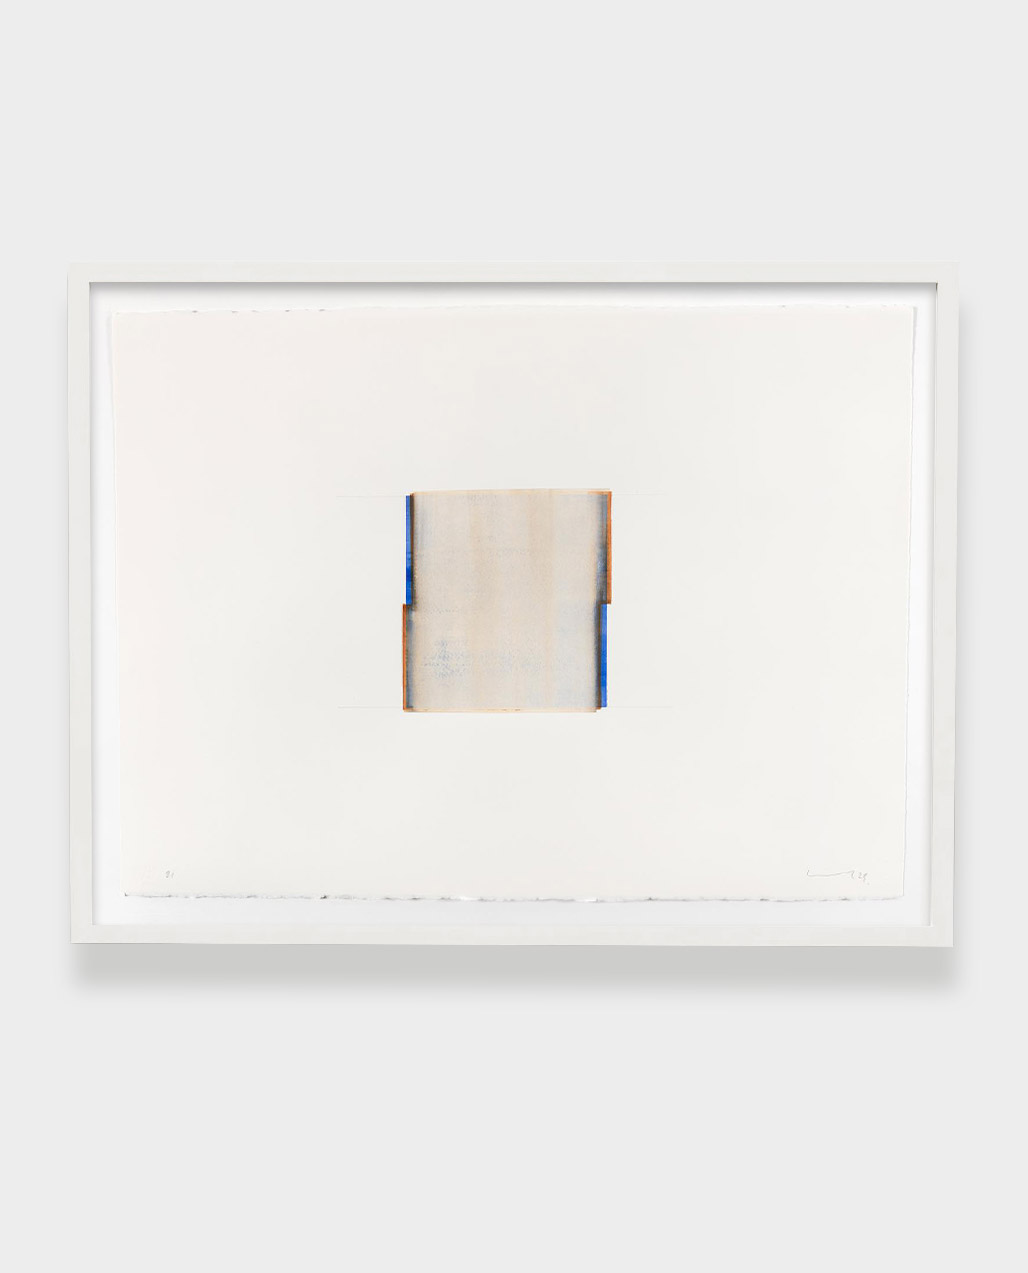 Callum Innes, French Ultra Marine / Transparent Sienna, 2023, Watercolour on Arches 640gsm HP, 77x58 cm, represented by OSL Contemporary